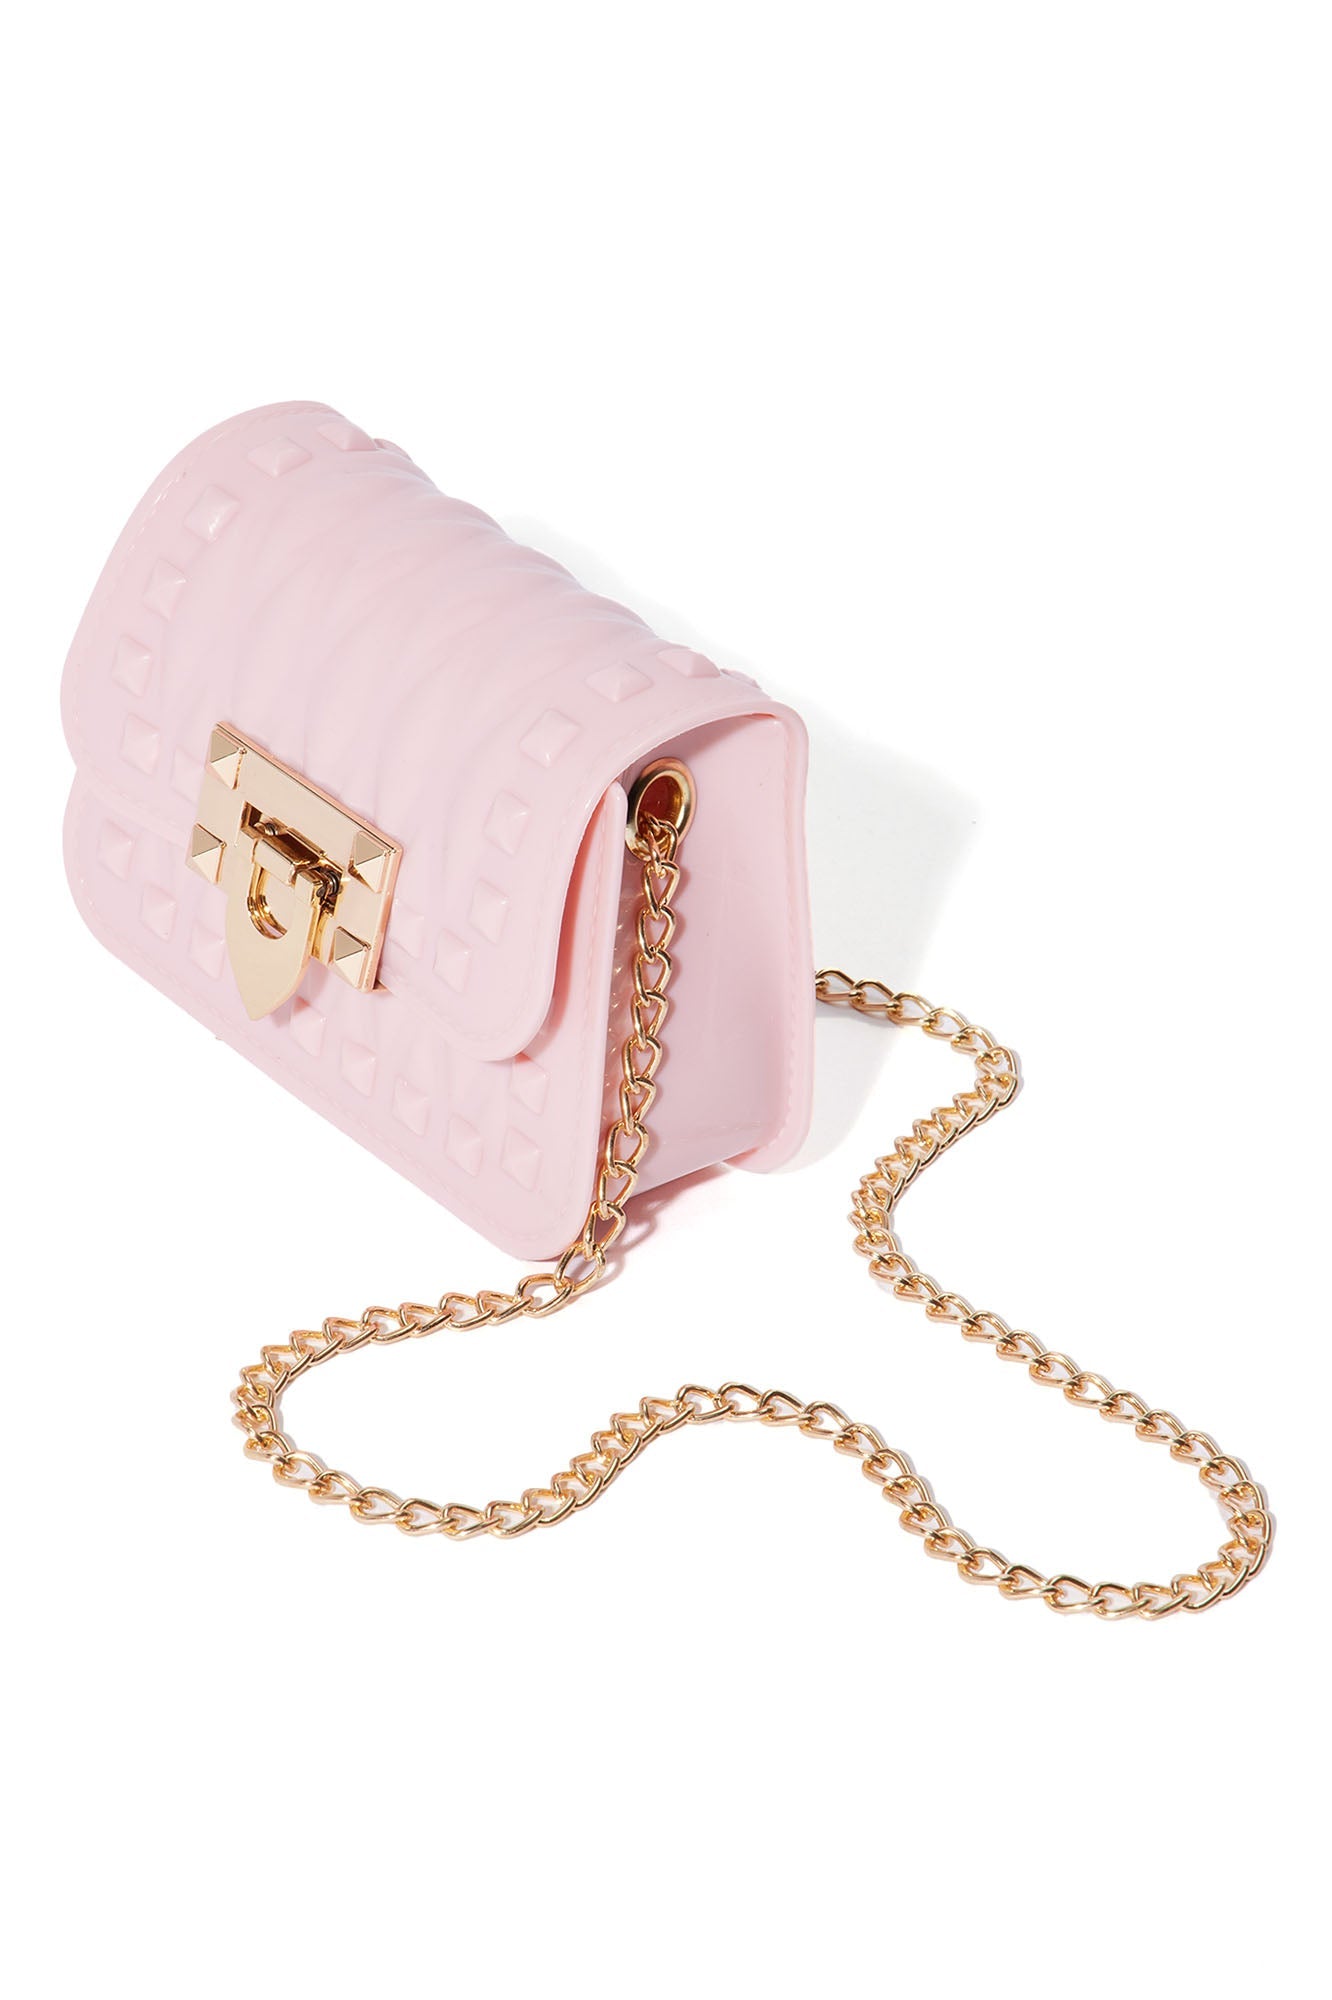 Mini Ms. Diva Crossbody Chain Purse in Pink: The Ultimate Glam Statement Piece